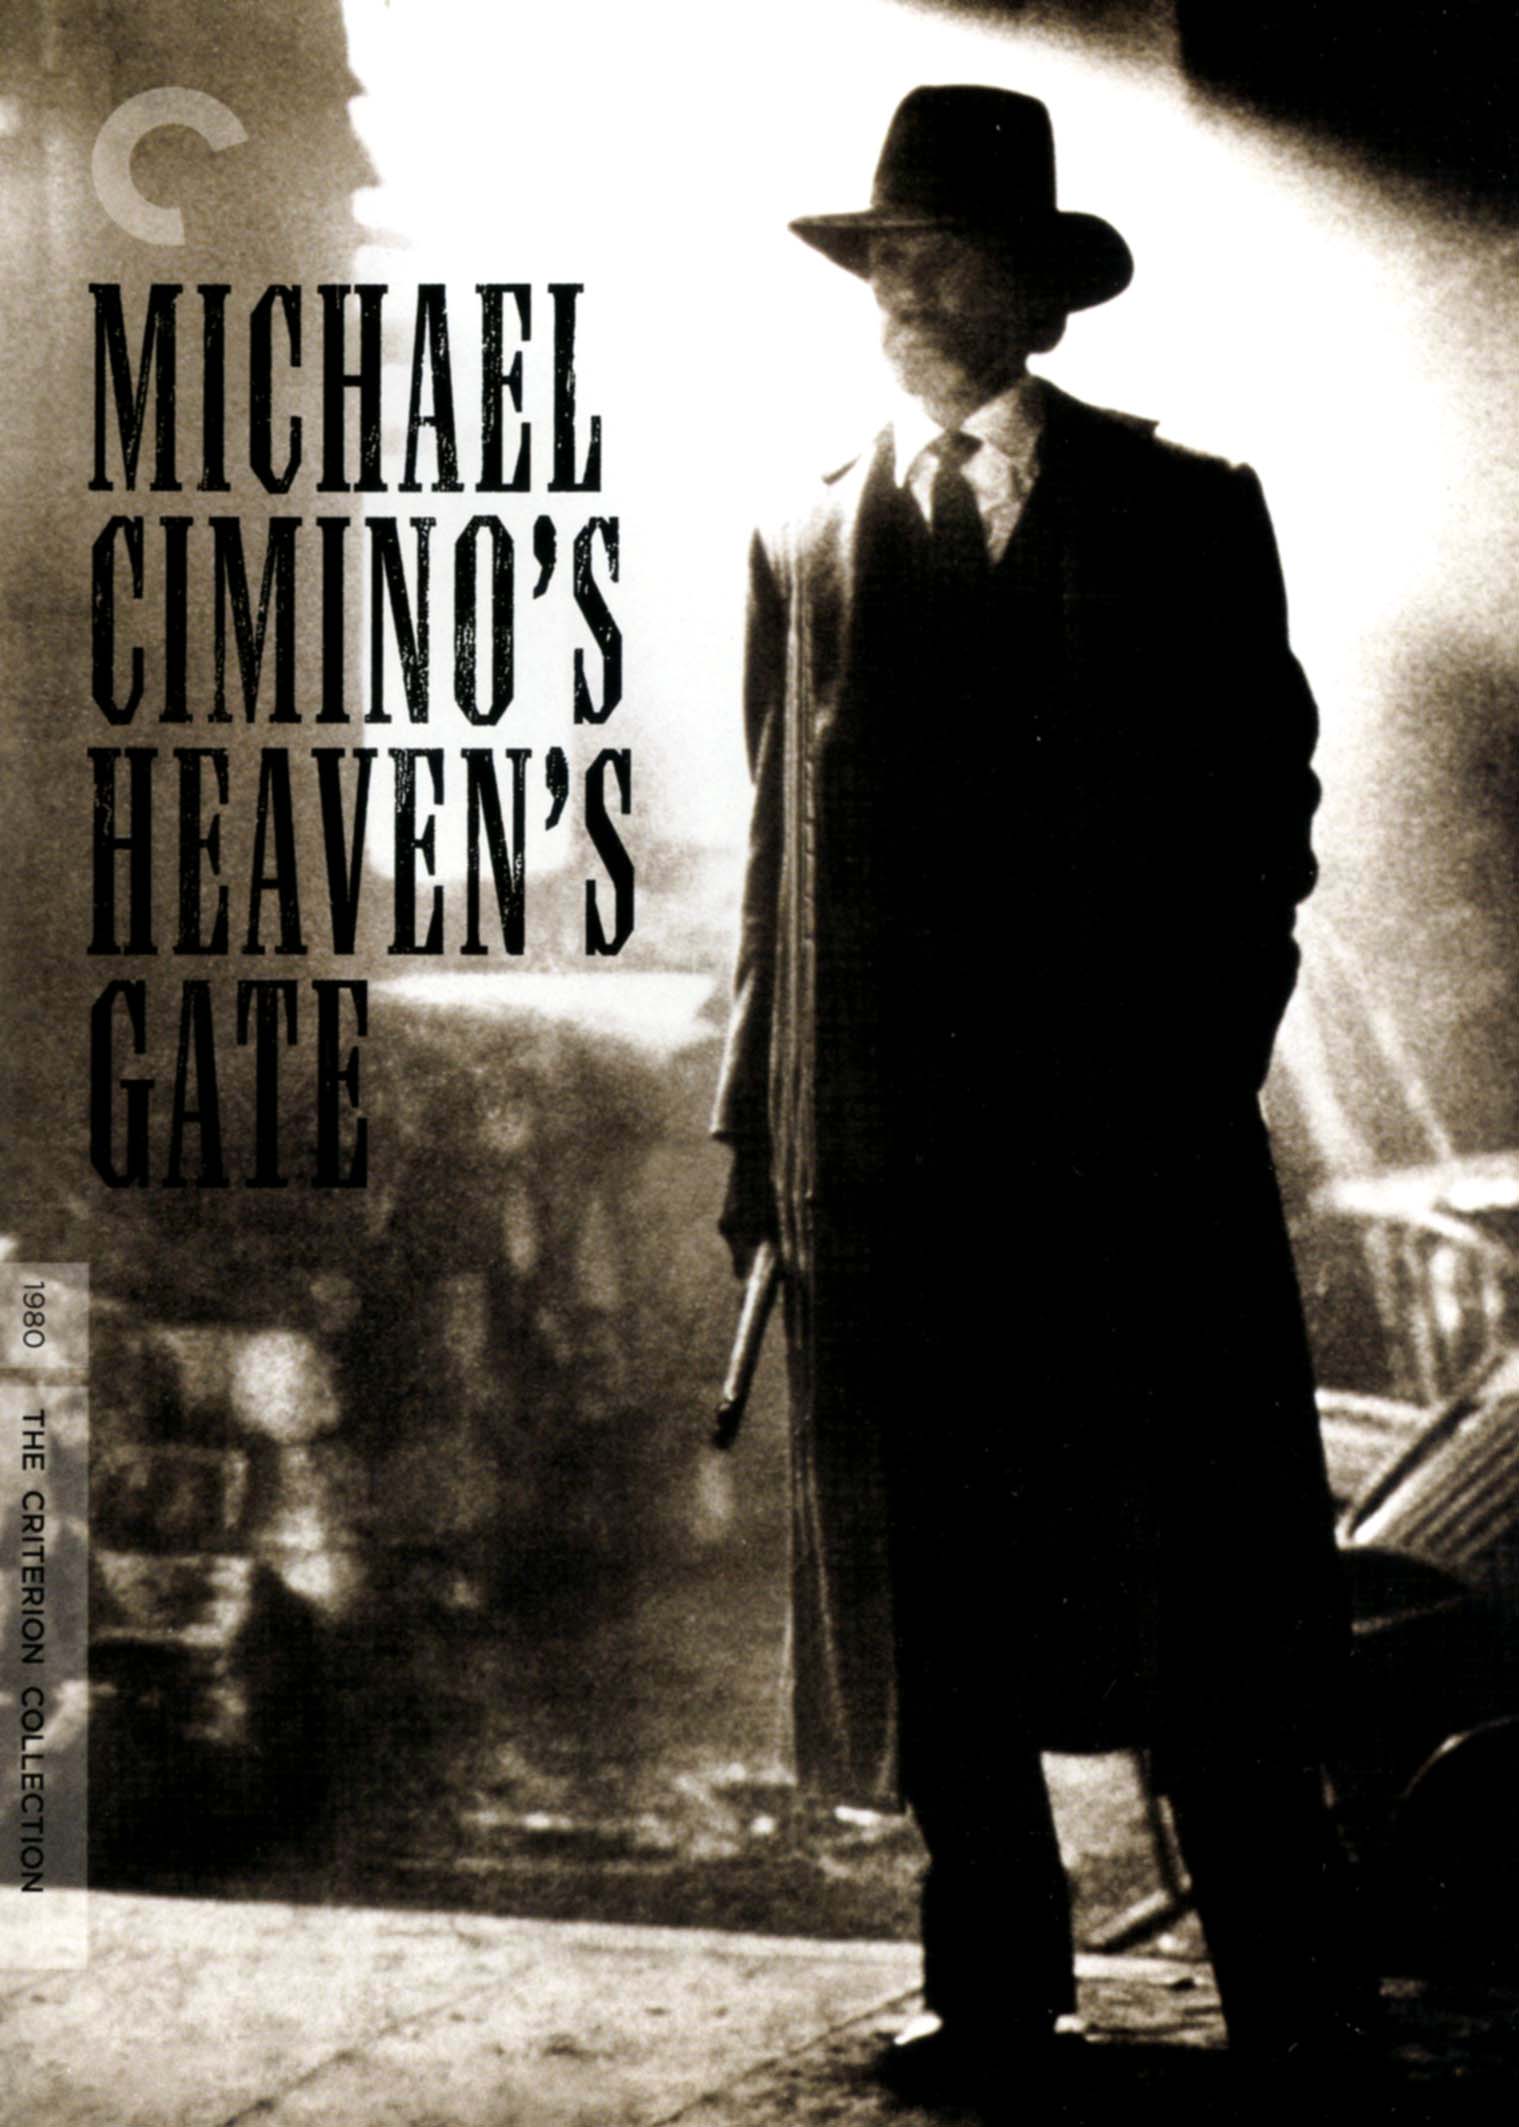 Heaven's Gate [Criterion Collection] [2 Discs] [DVD] [1981] - Best Buy